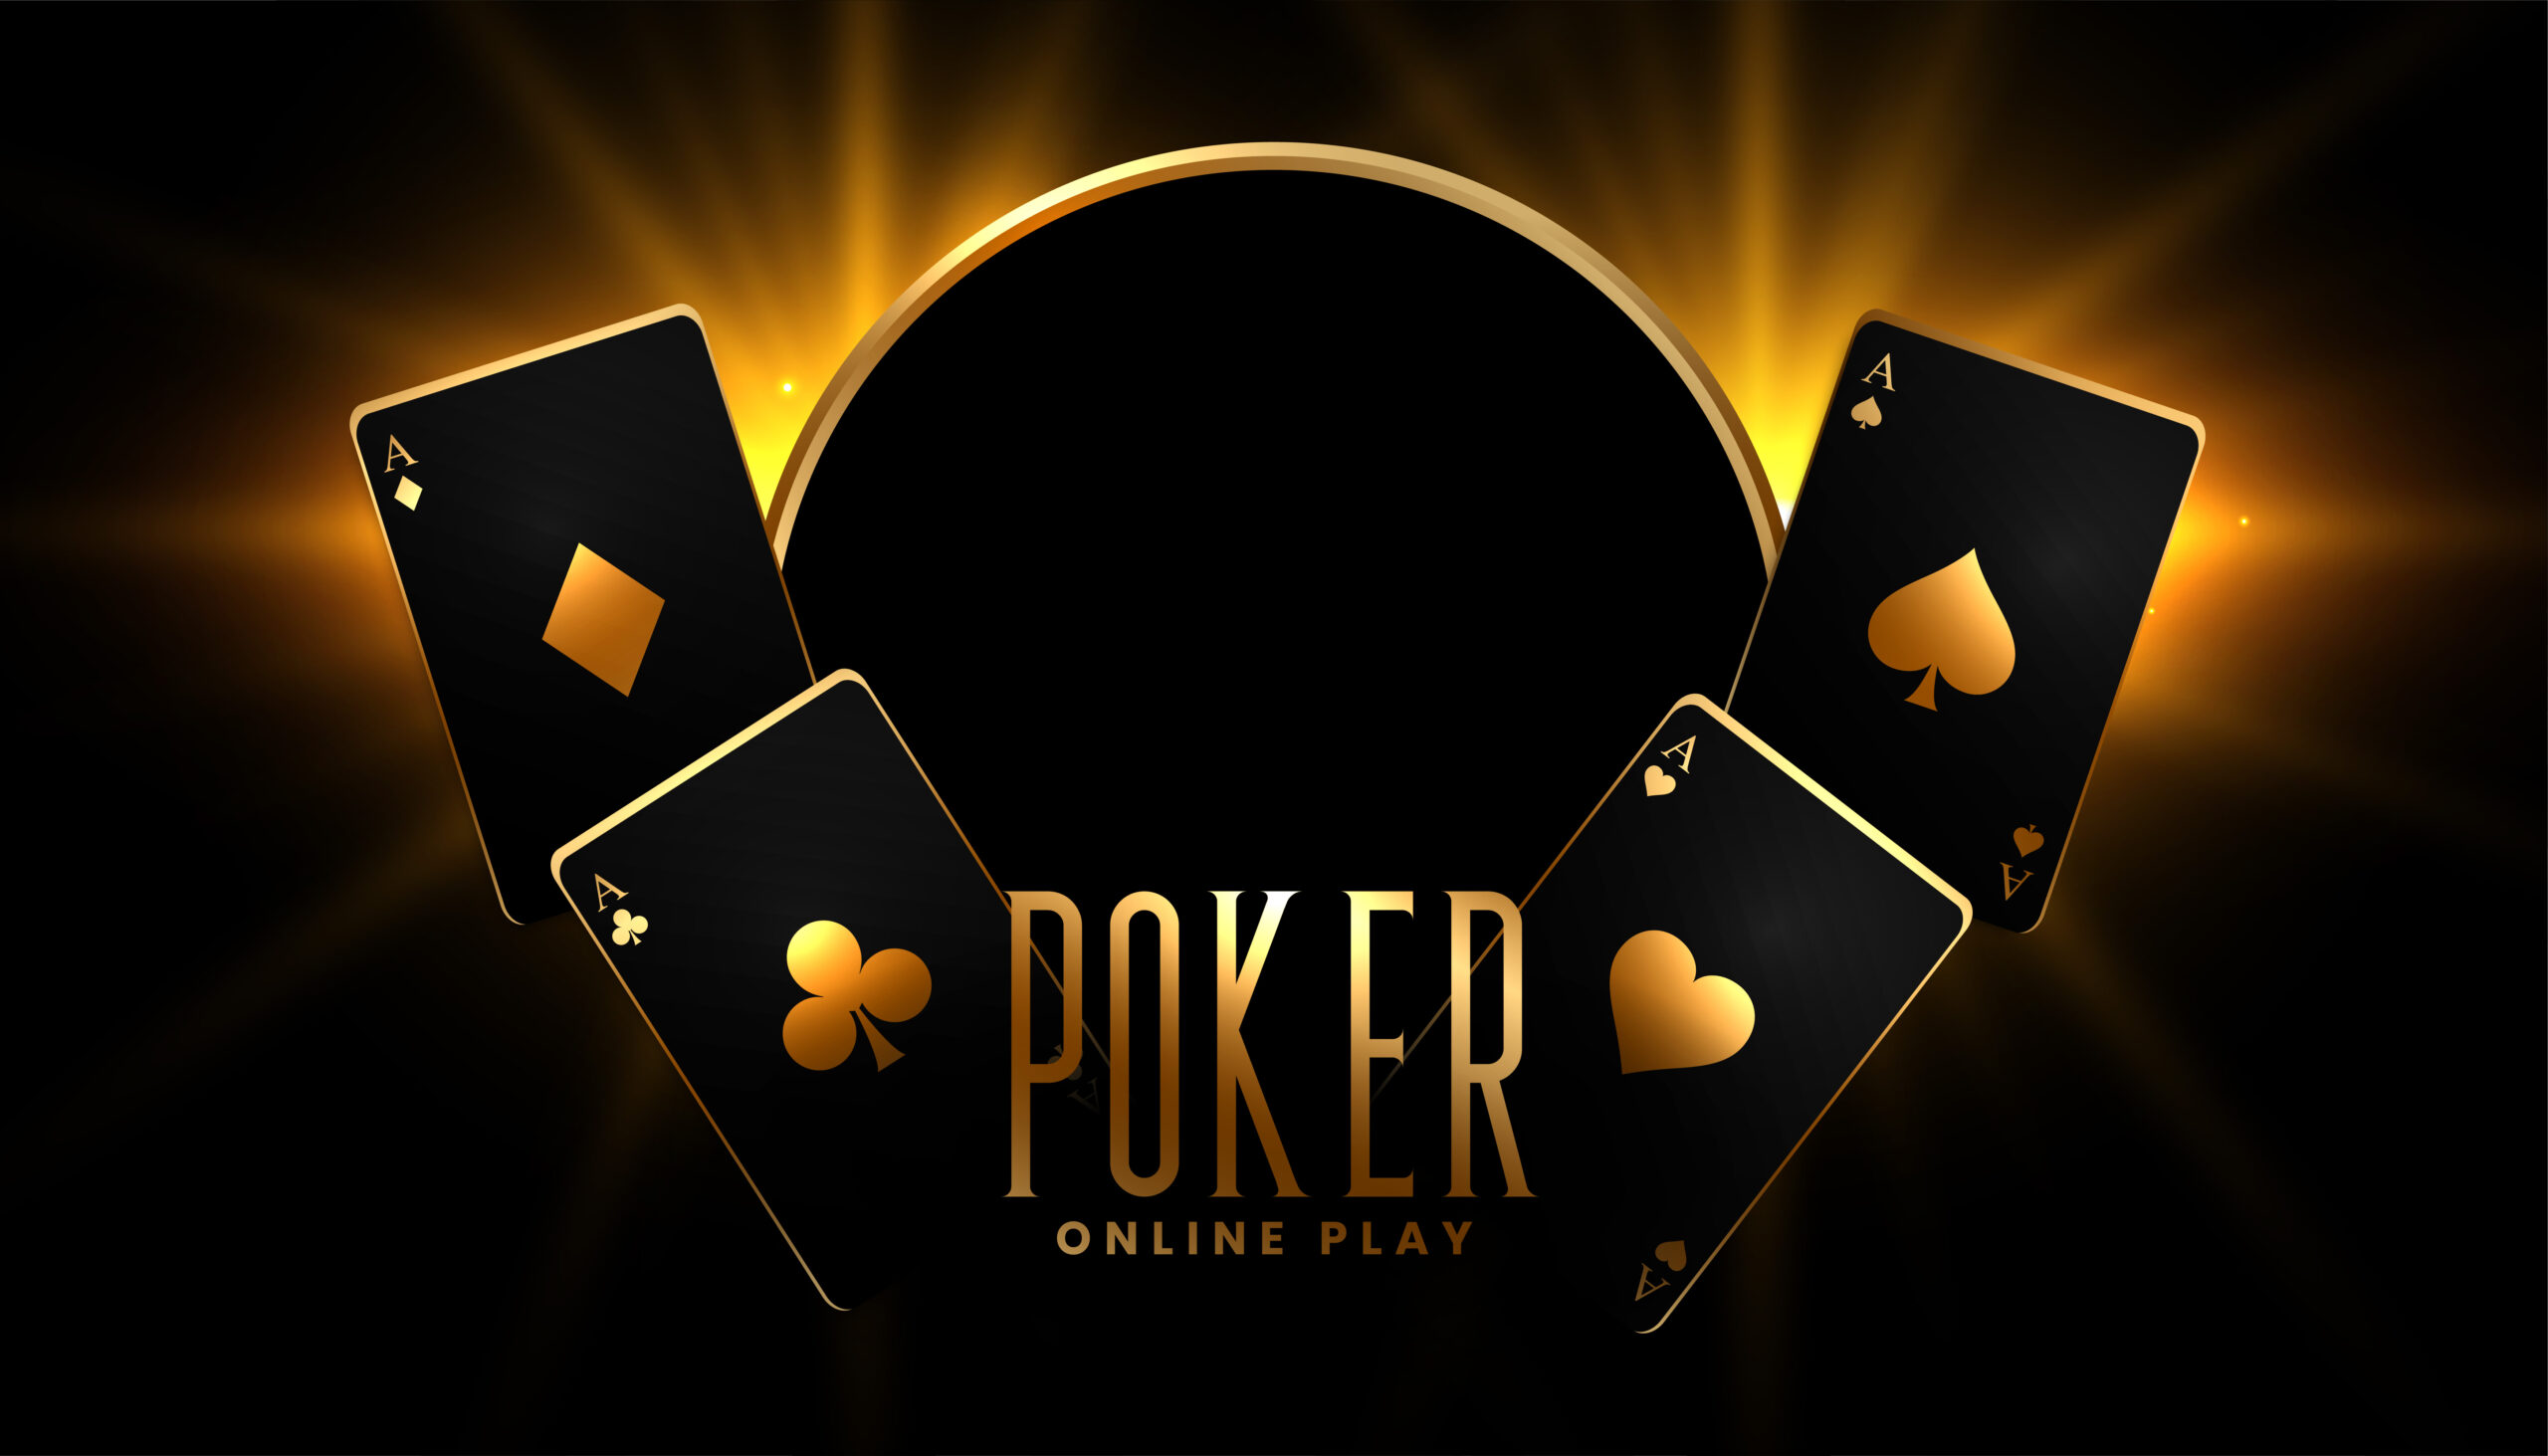 What are the reasons to play online poker games?